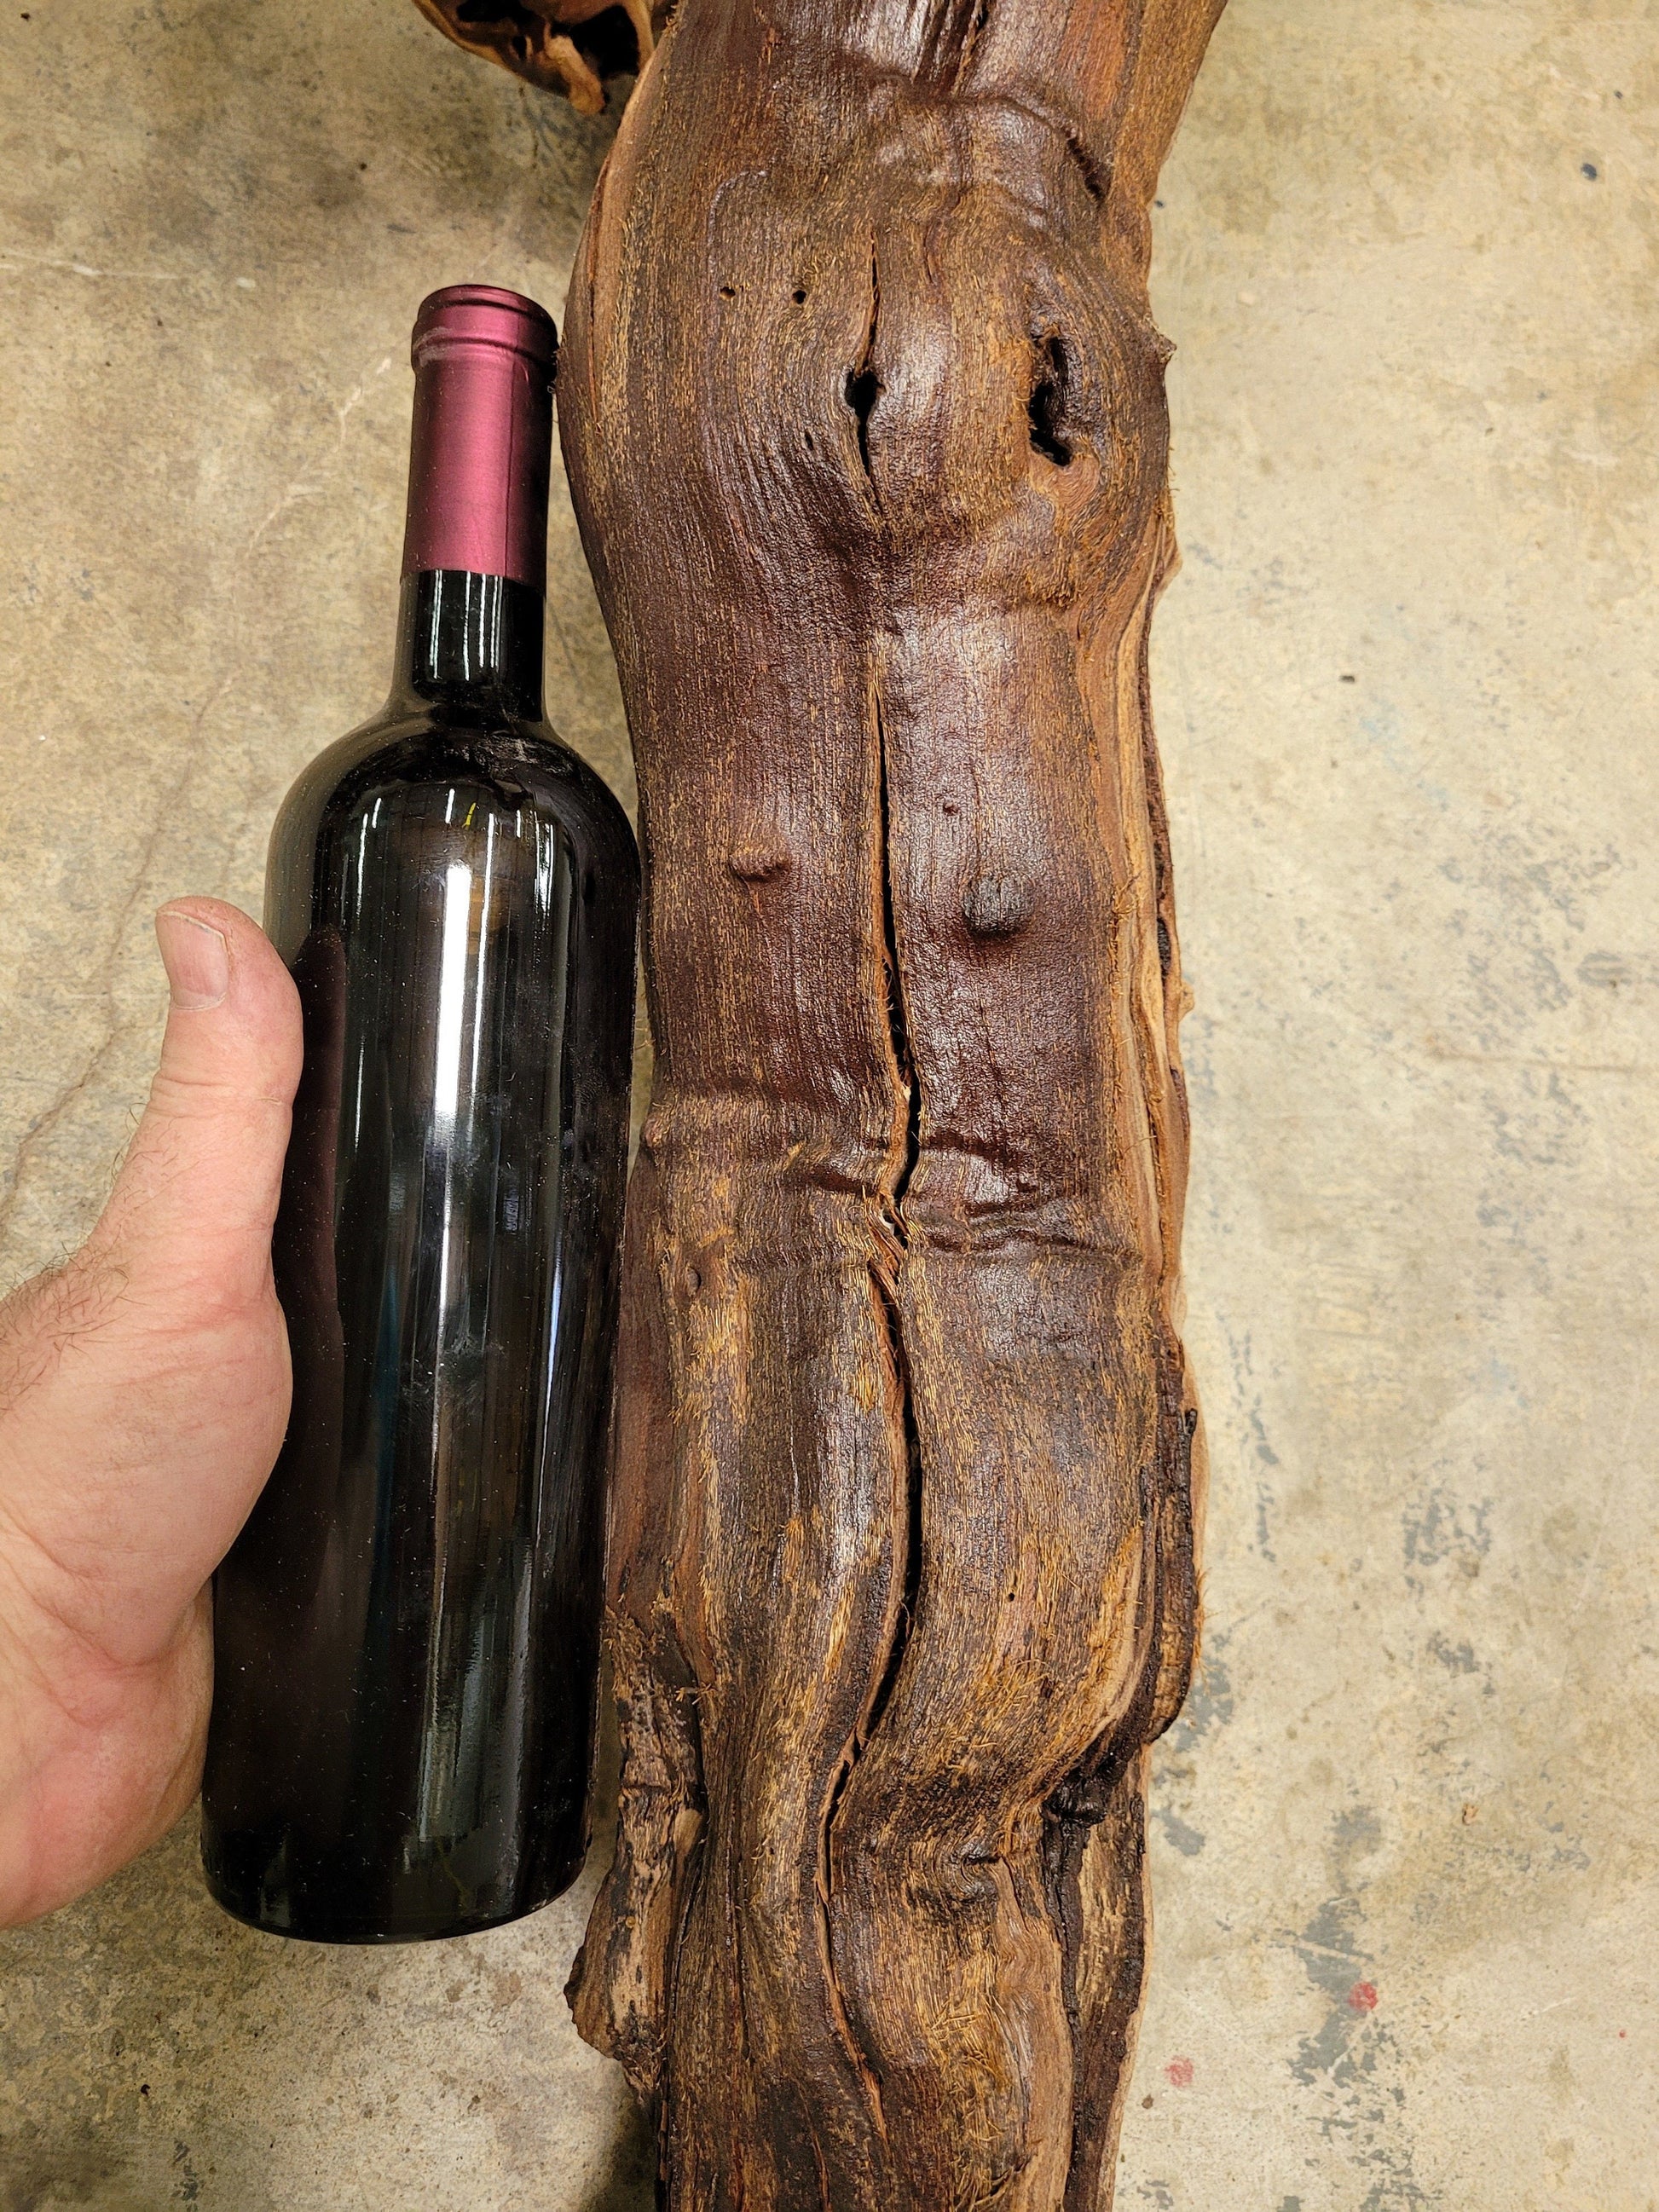 Grape Vine Art From Silver Oak 0675 made from retired Napa Zinfandel grapevine 100% Recycled + Ready to Ship!